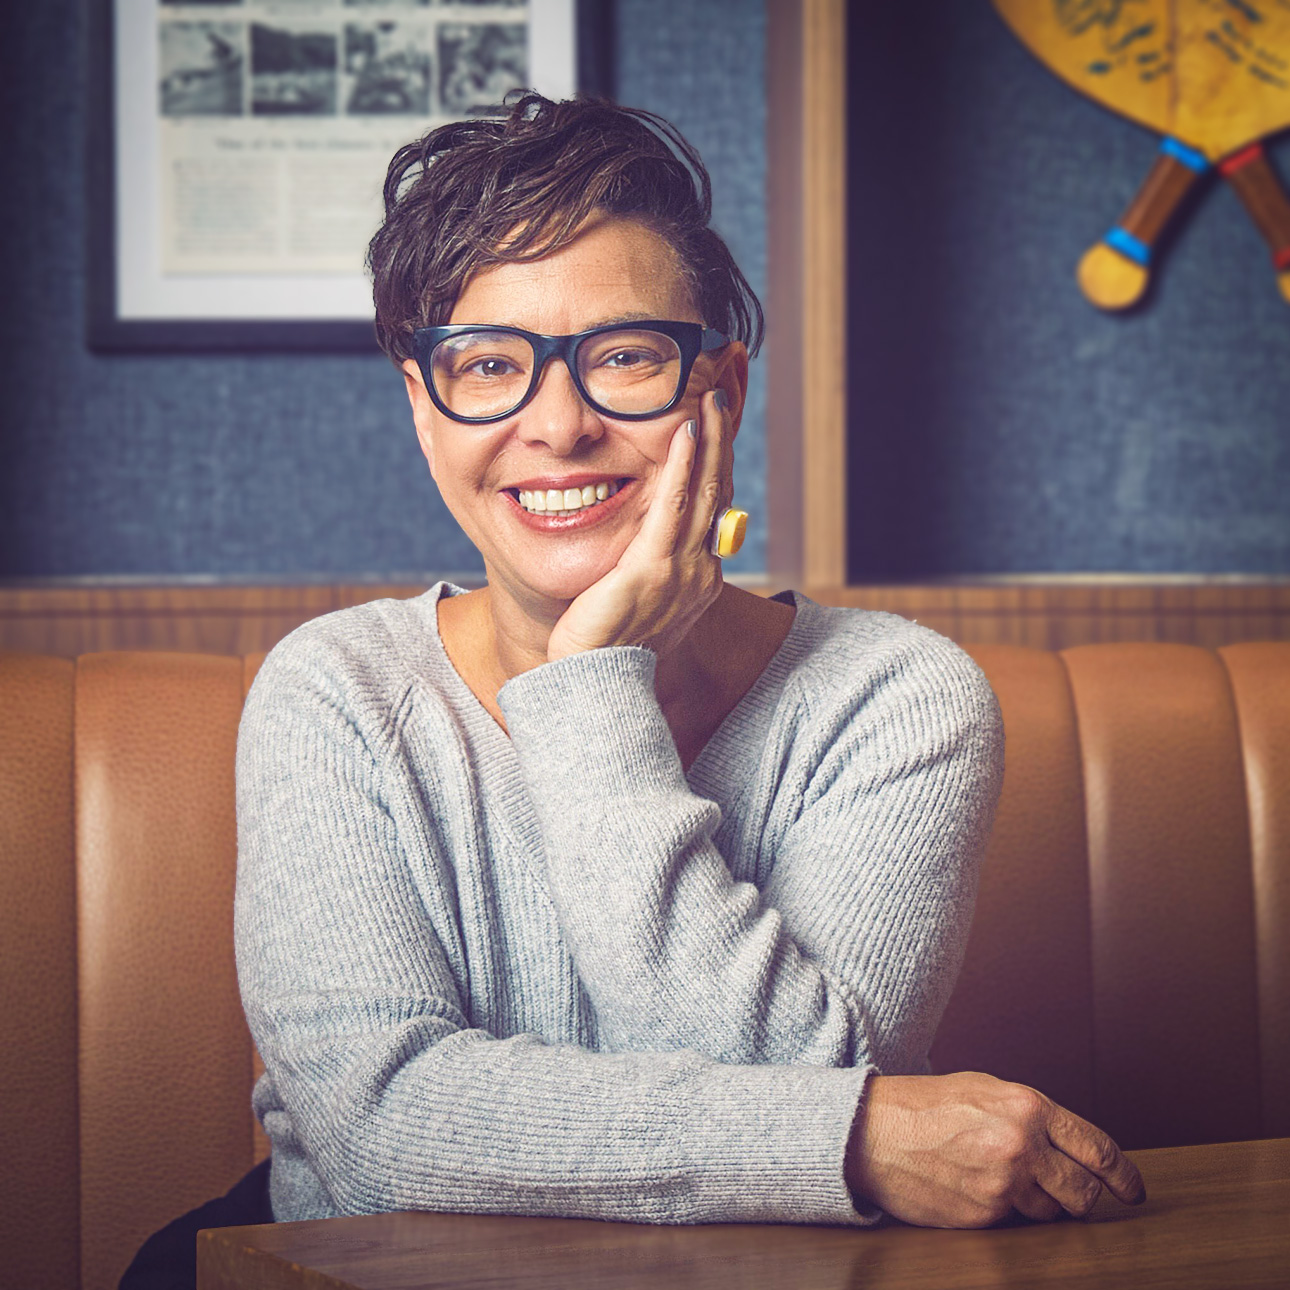 A smiling person with short dark hair wearing blue glasses posing in a dinette